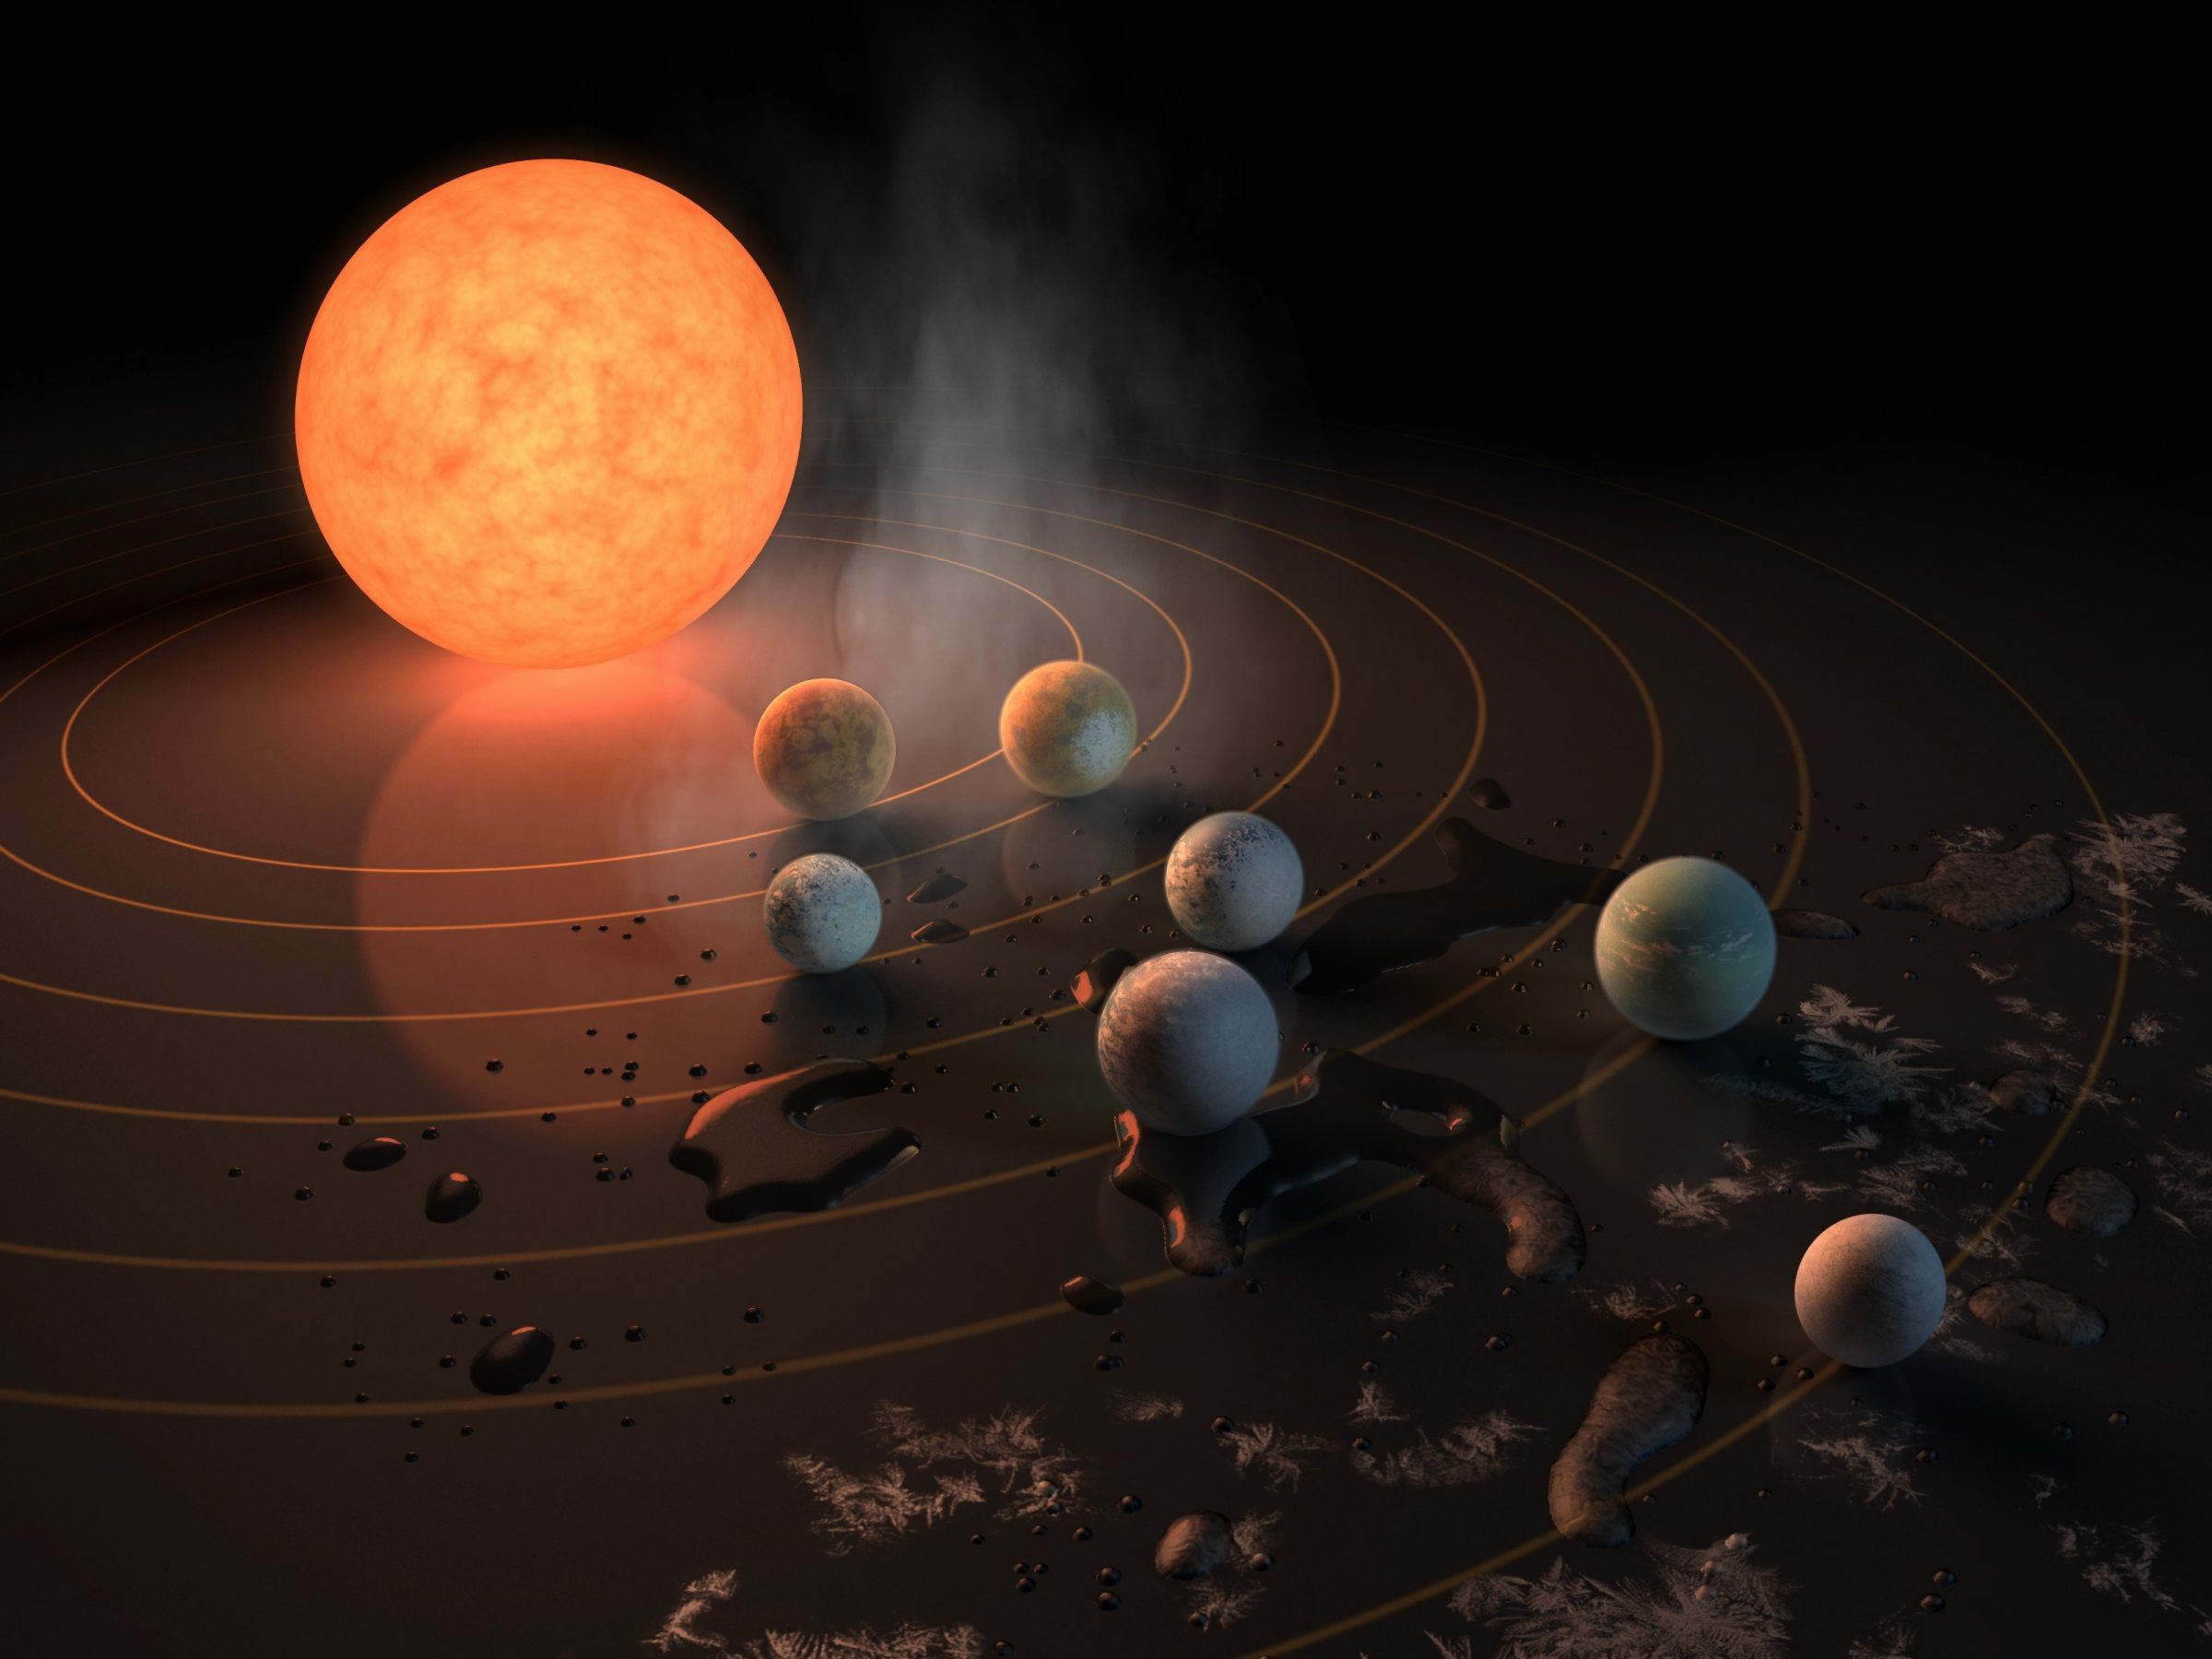 Discovered just 7 potentially habitable earth-like planets within a single system